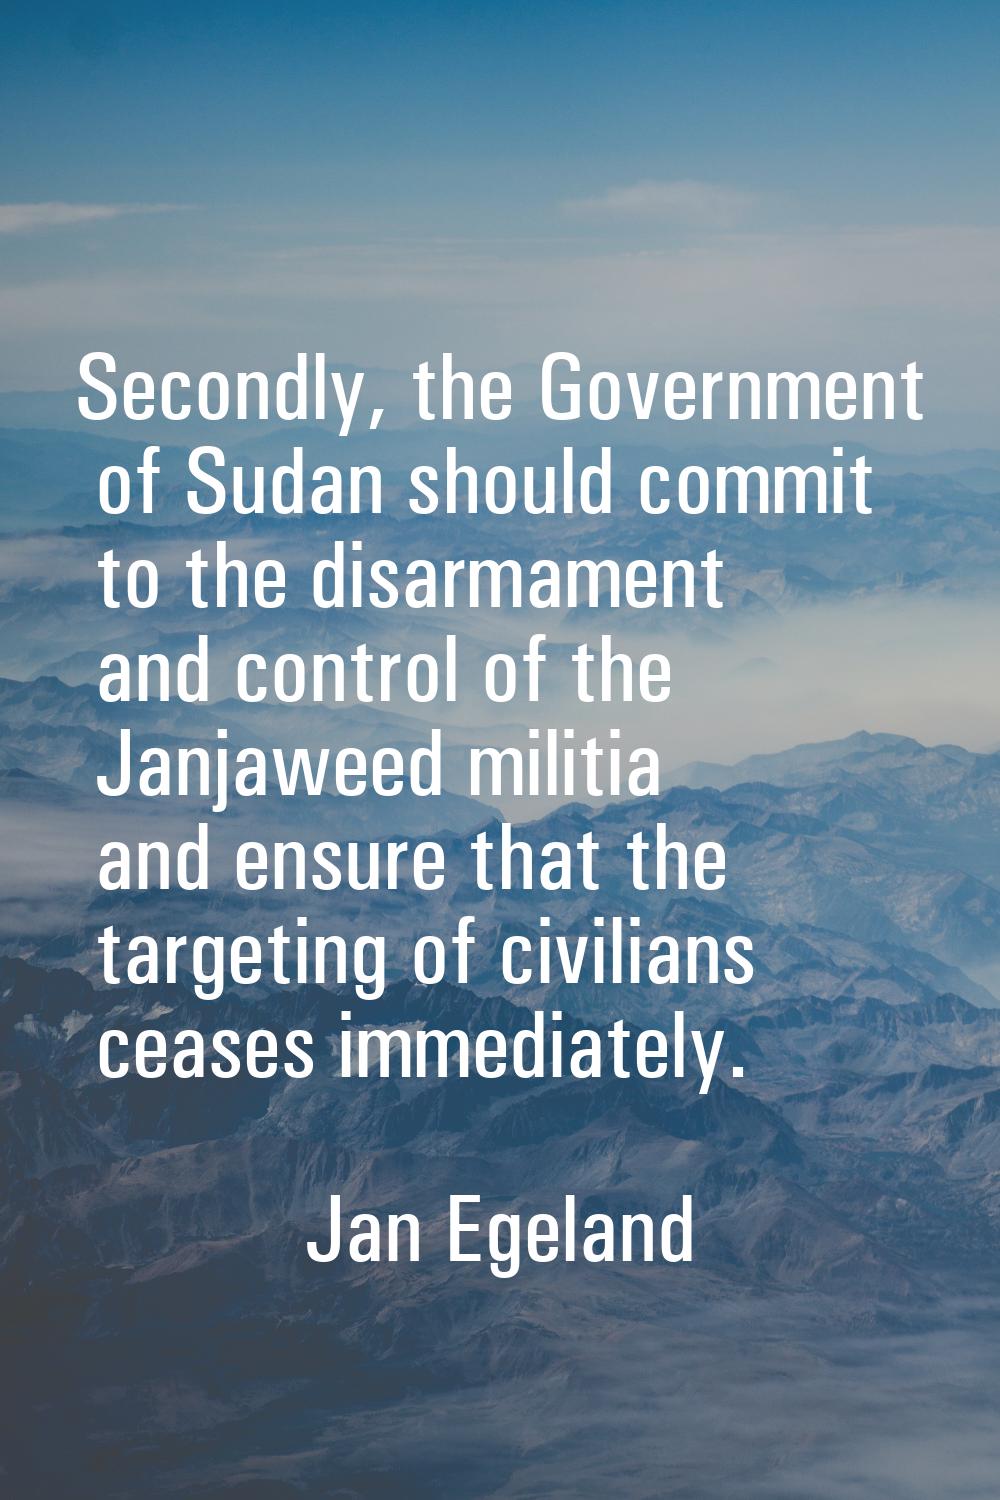 Secondly, the Government of Sudan should commit to the disarmament and control of the Janjaweed mil